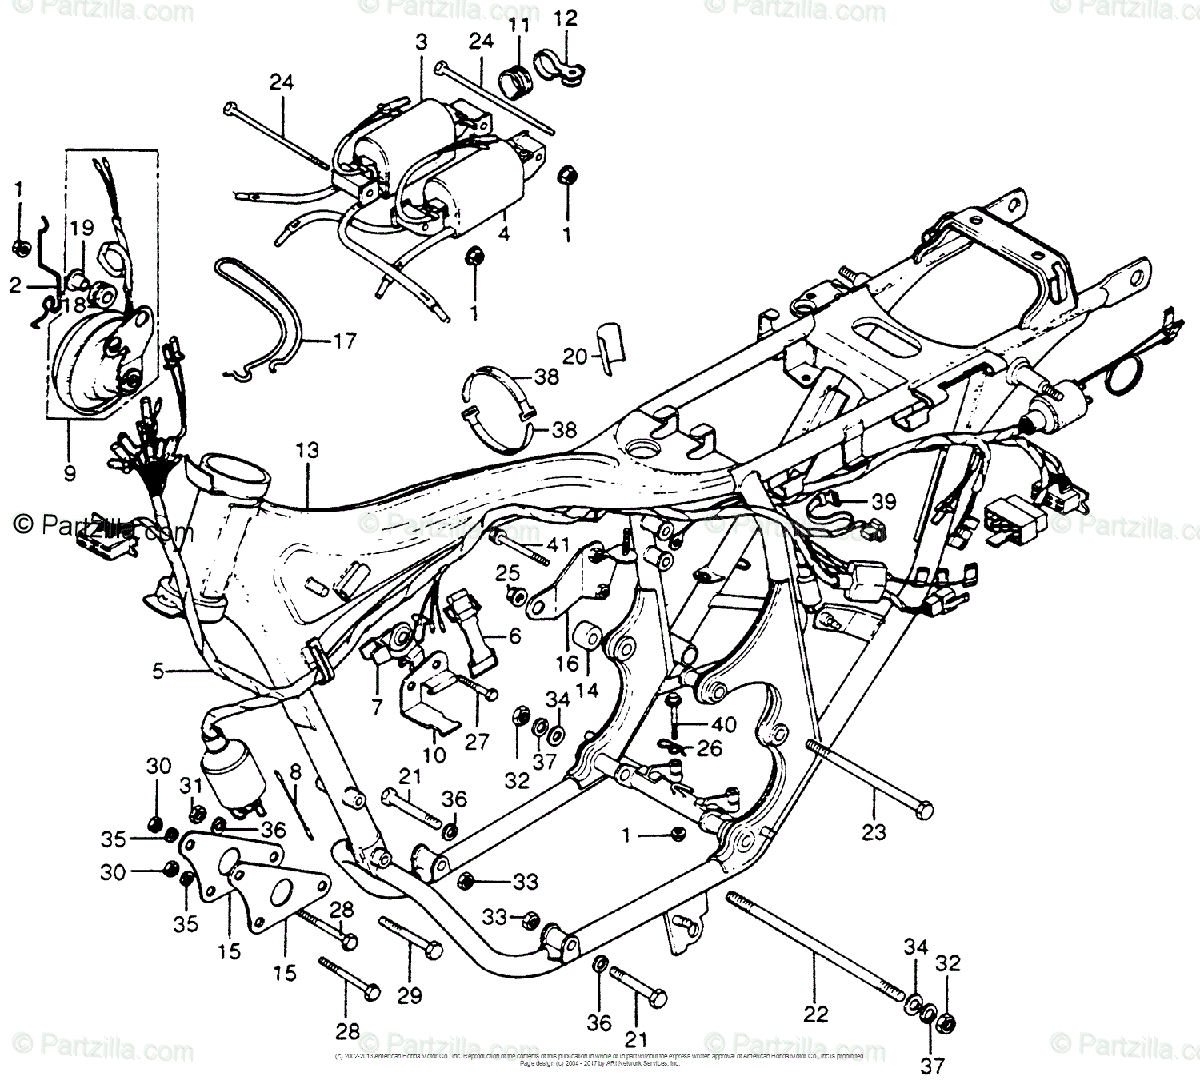 Honda Motorcycle 1976 OEM Parts Diagram for Wire Harness / Frame |  Partzilla.com Cafe Racer Wiring-Diagram Partzilla